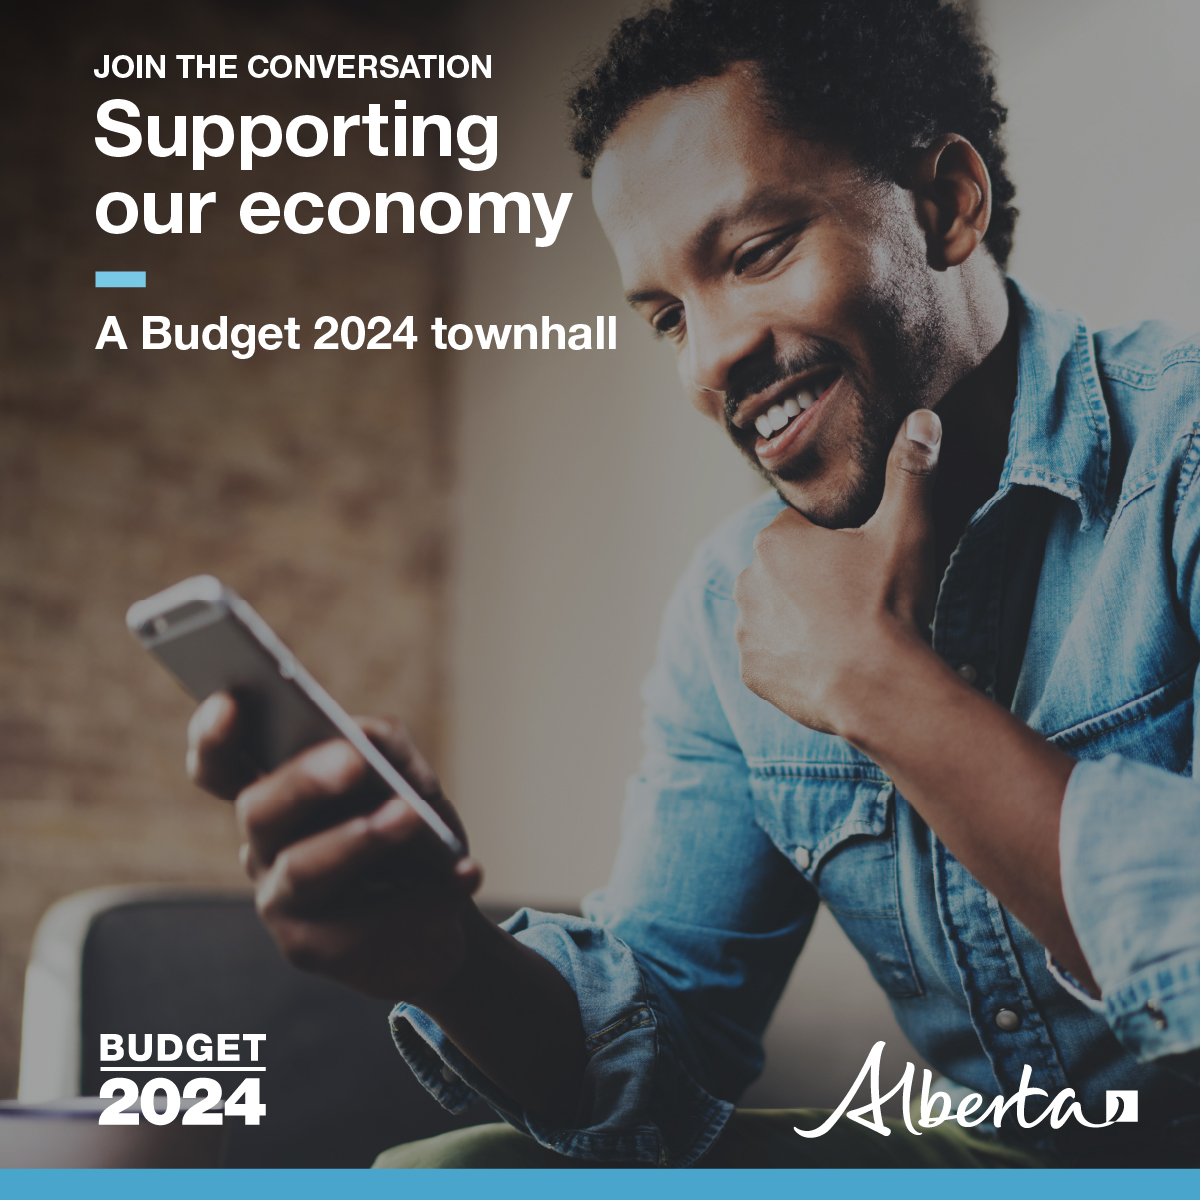 Join Ministers @MattJonesYYC, @RajanJSaw, @nateglubish and @DevinDVote for a telephone town hall to learn more about how Budget 2024 supports our economy. Southern Alberta Tonight from 7:00 – 8:30PM alberta.ca/budgettownhalls